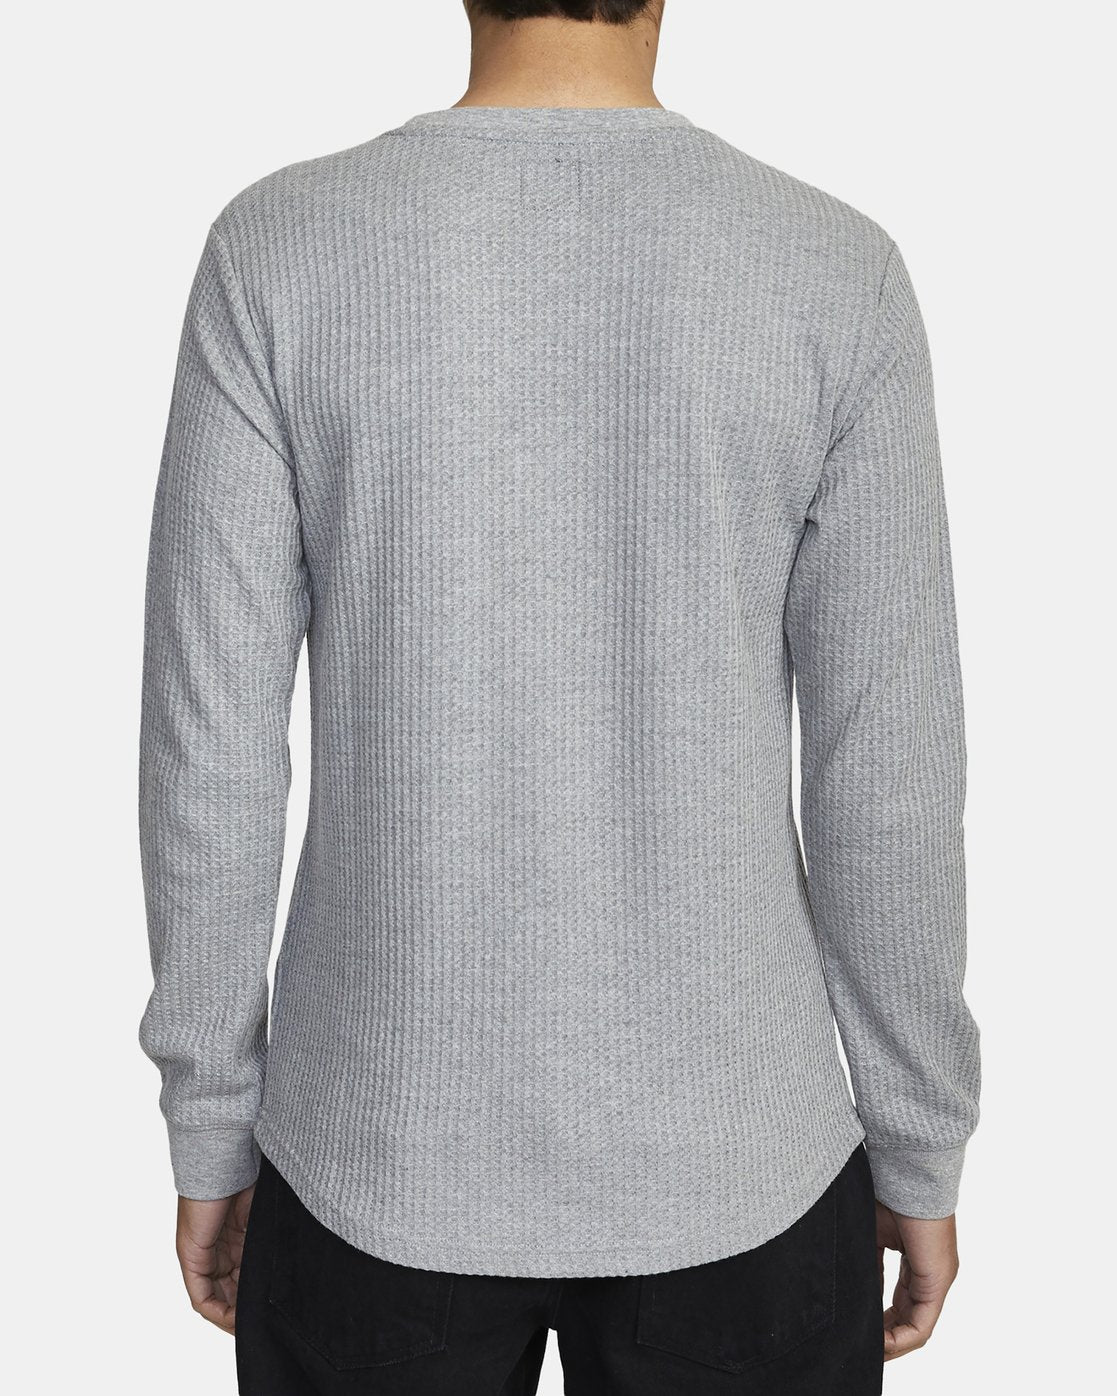 RVCA - Day Shift Thermal Long Sleeve